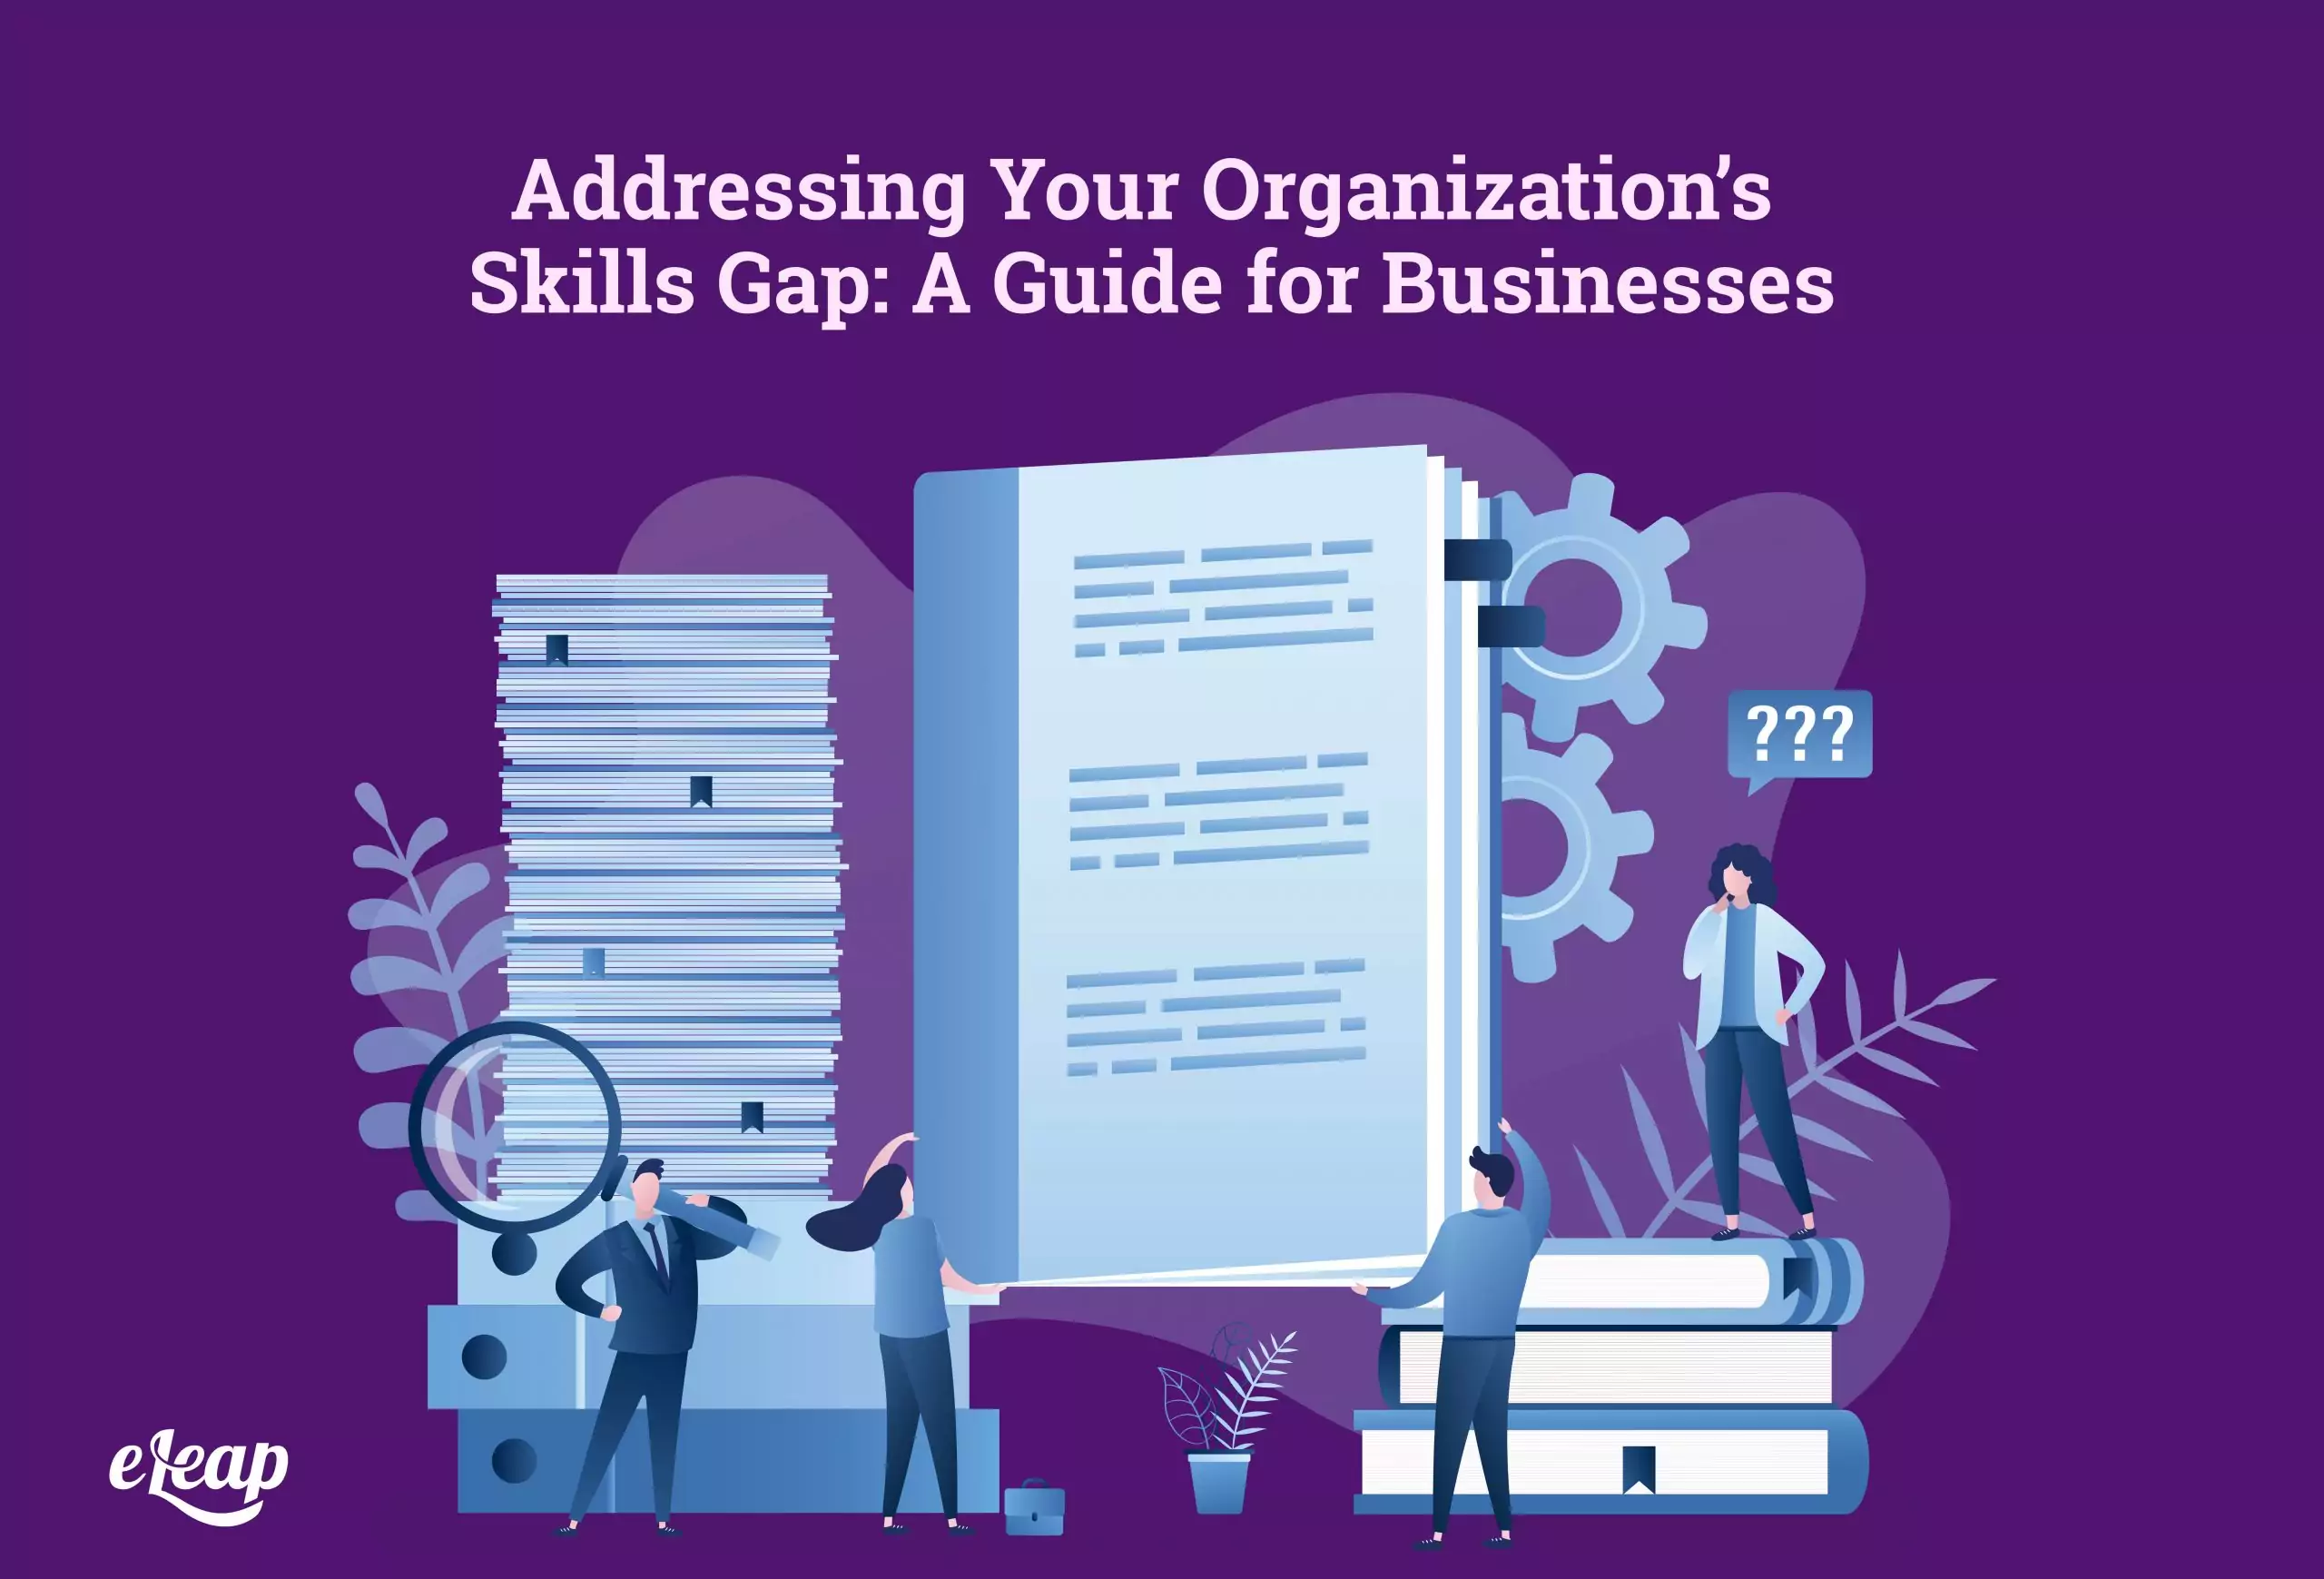 Addressing Your Organization’s Skills Gap: A Guide for Businesses